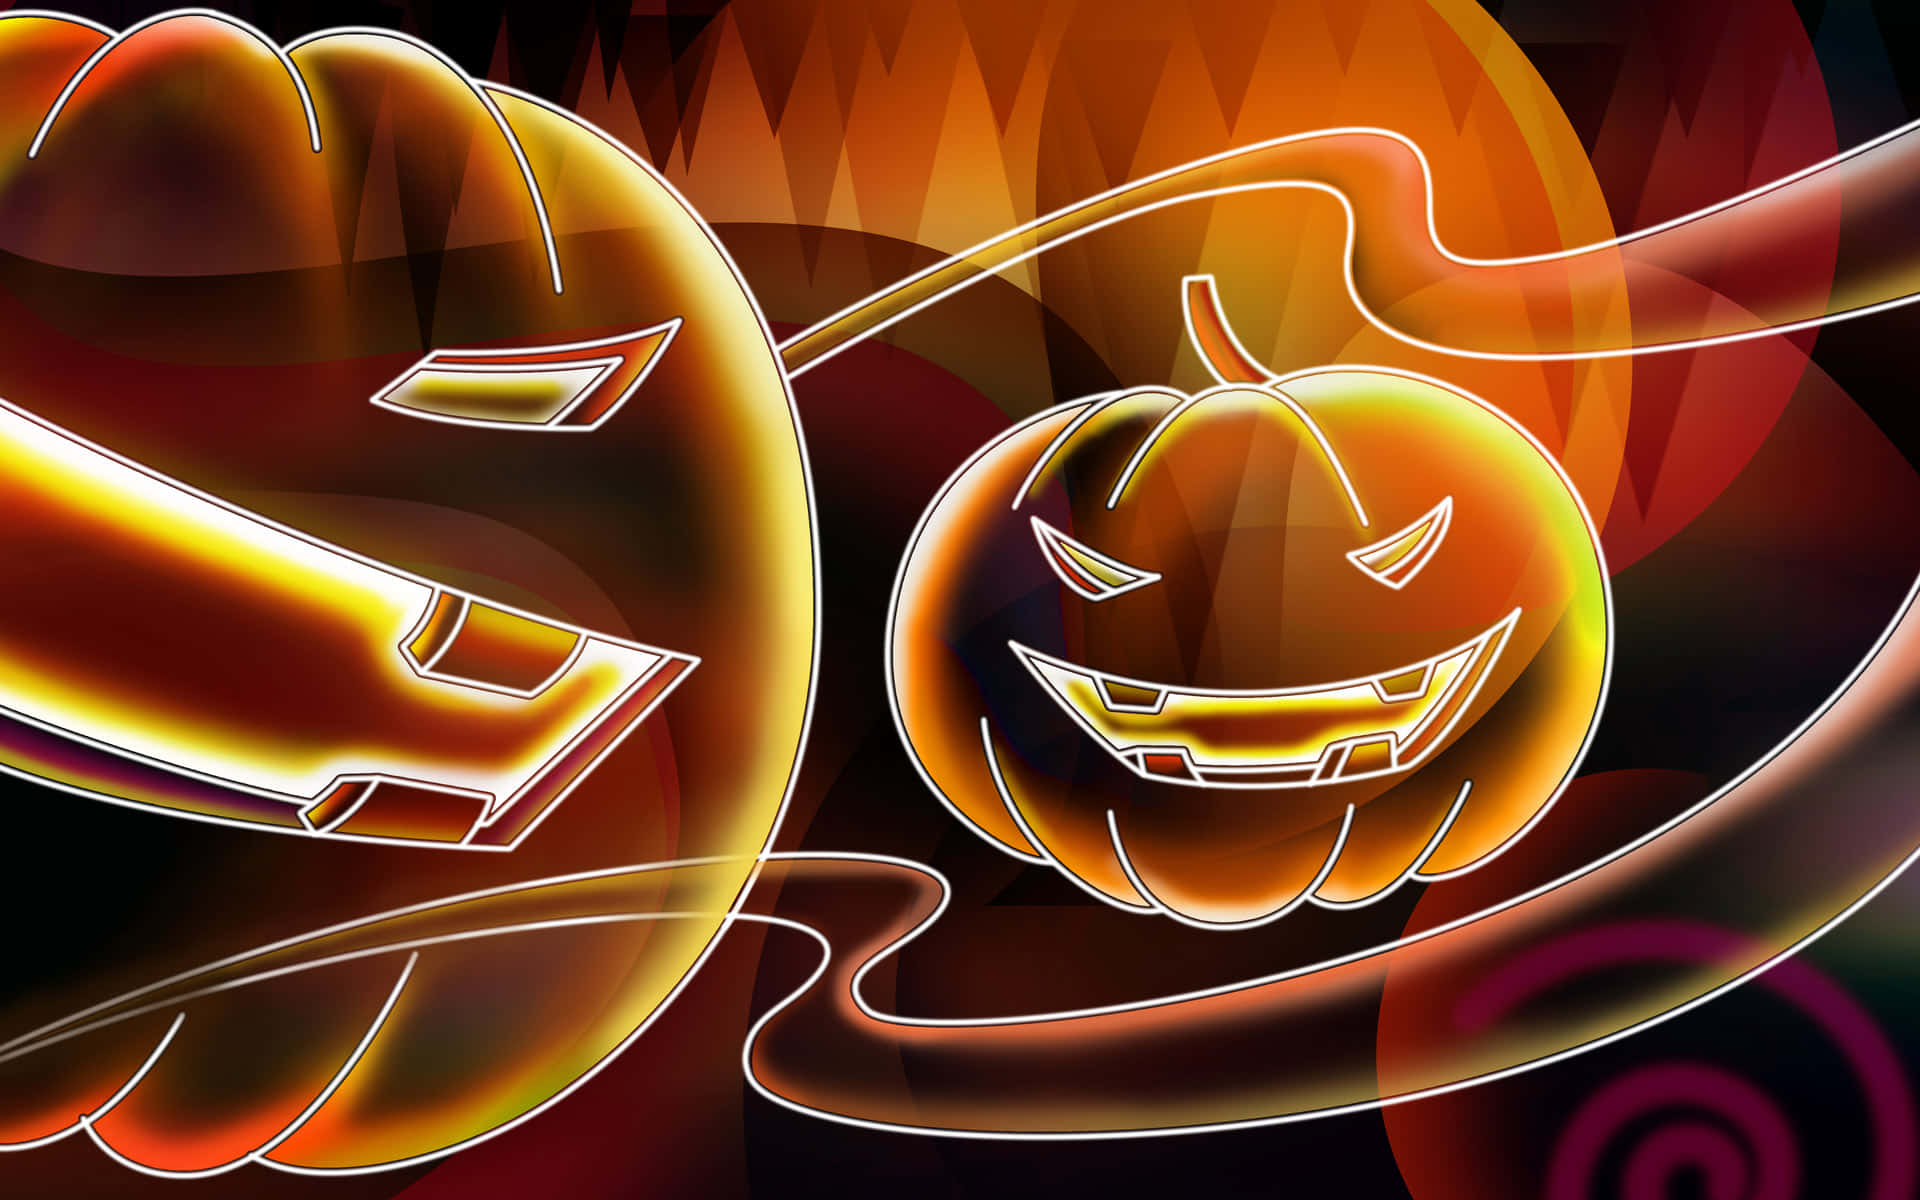 Get ready to party this Halloween with a neon twist! Wallpaper